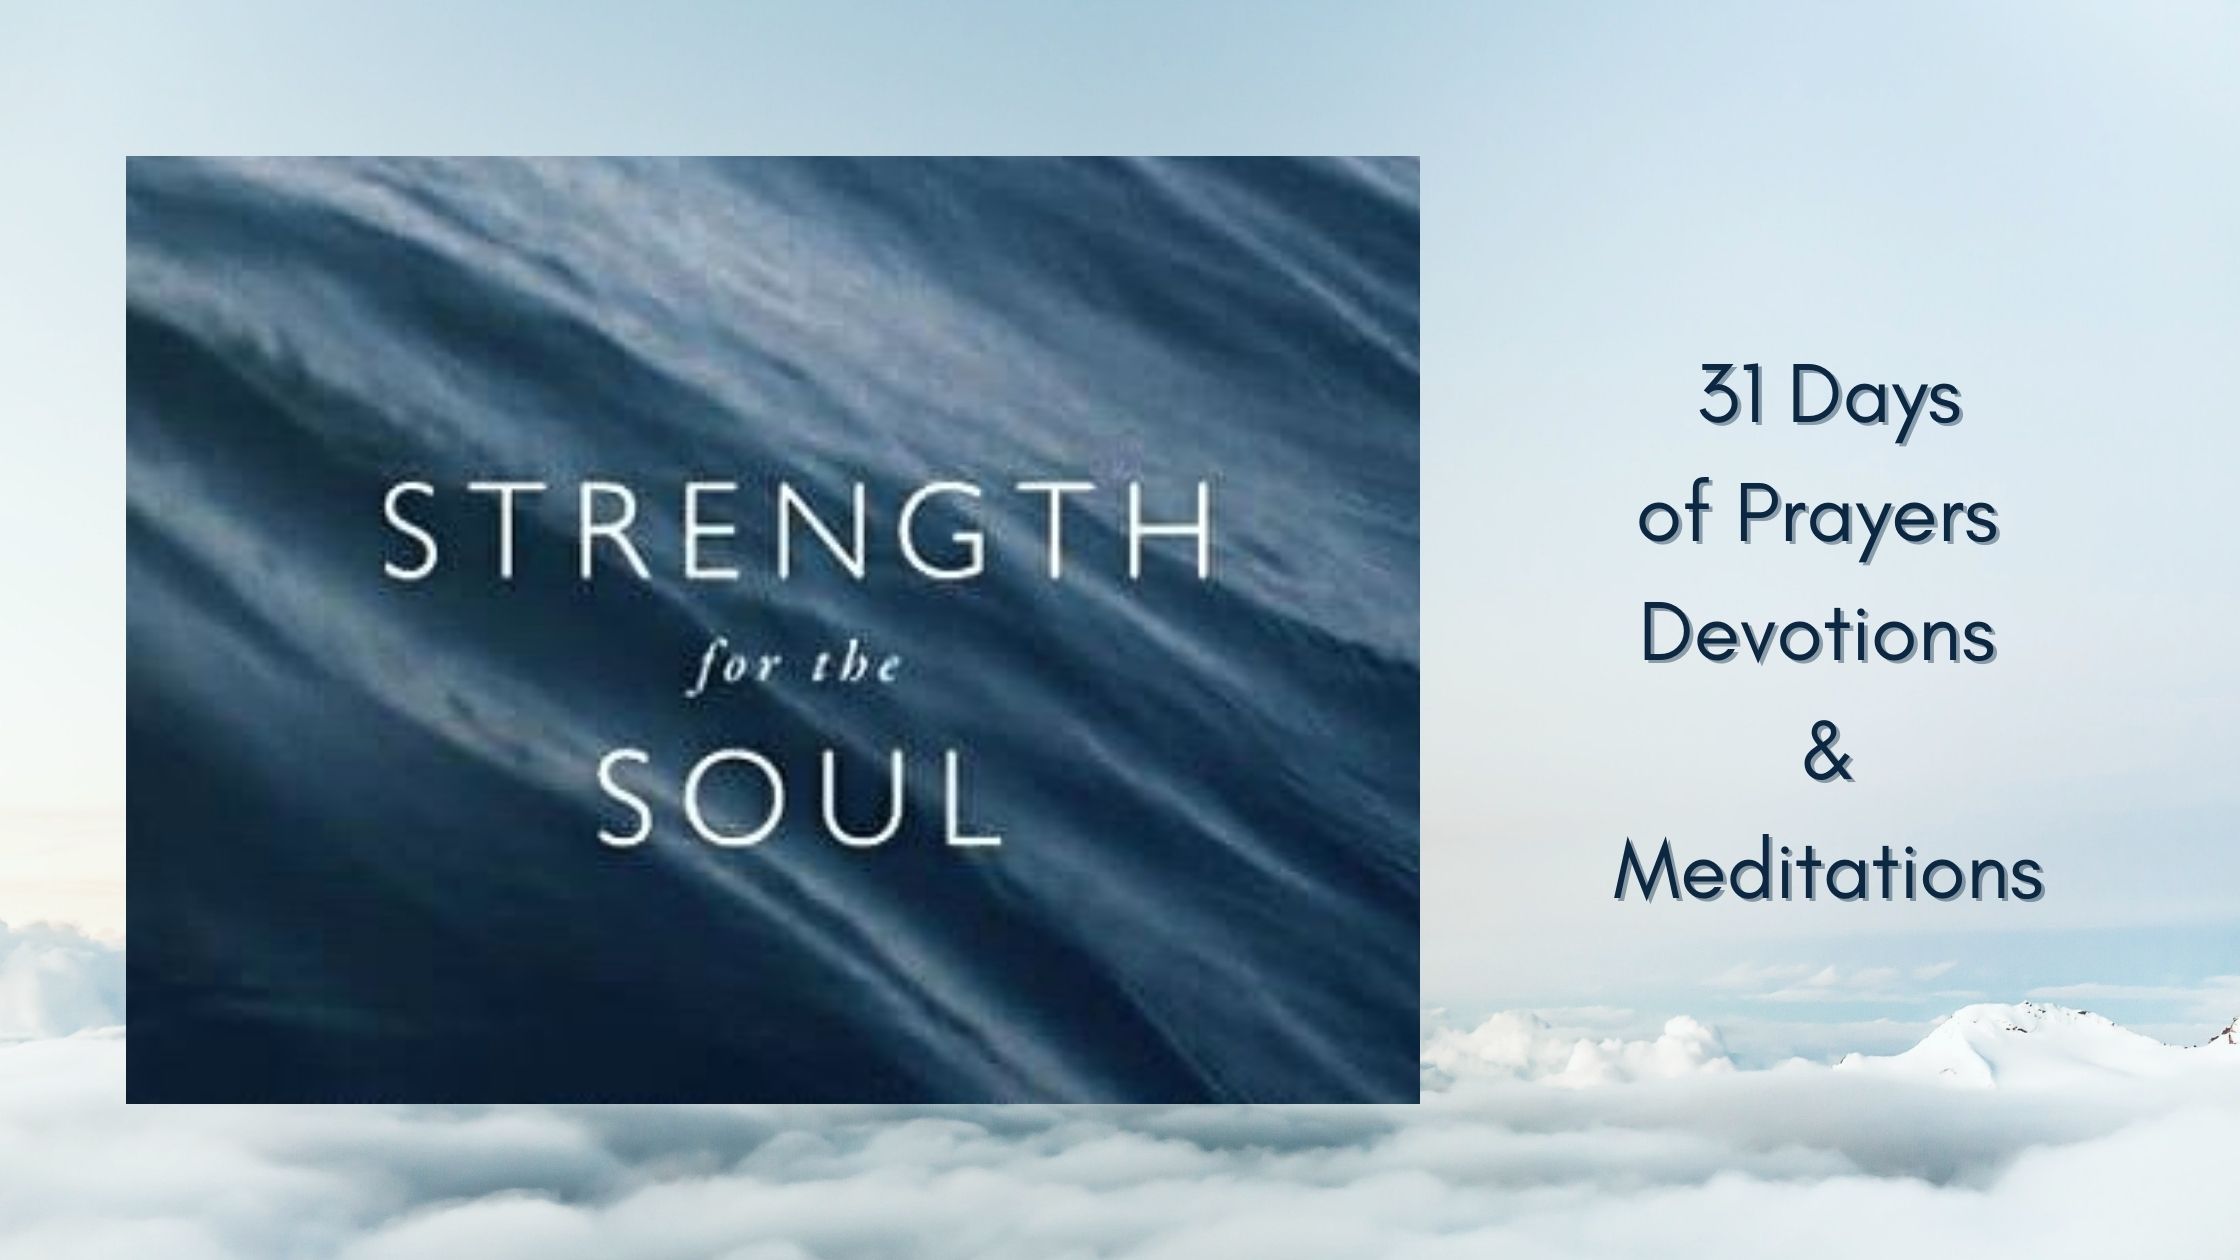 Interview with Eric Sandor, author of 'Strength for the Soul'